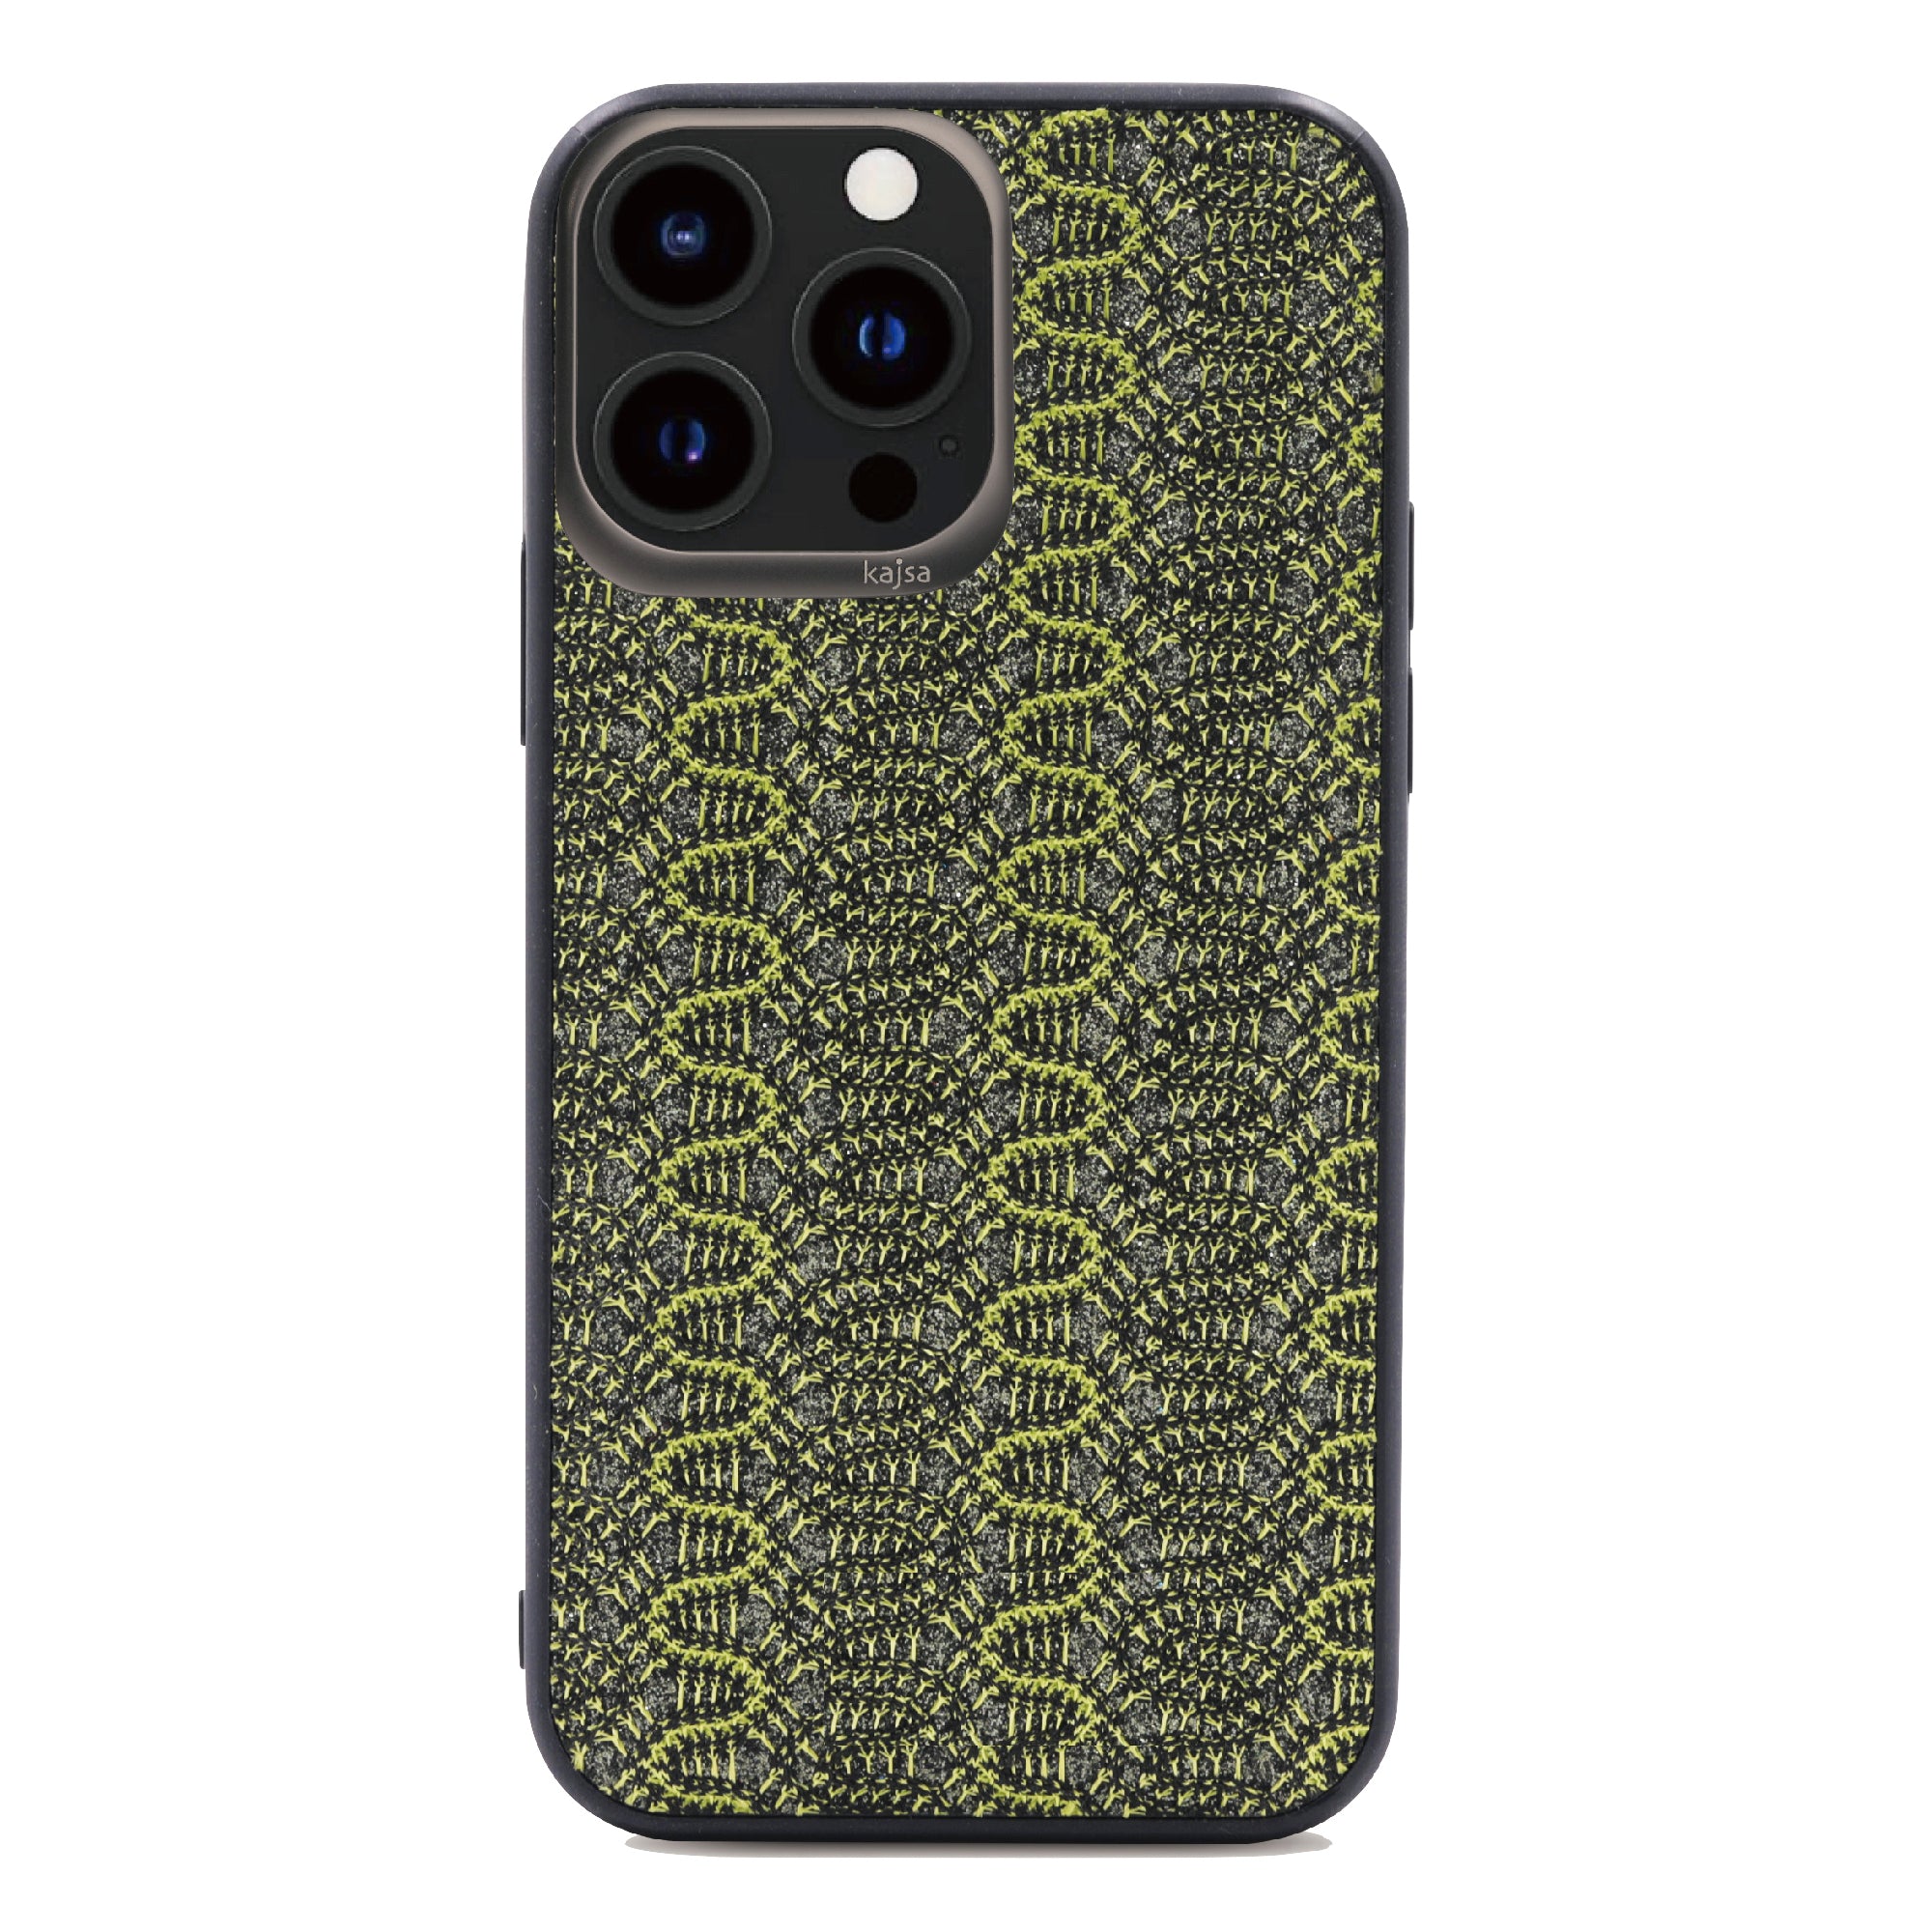 Glamorous Collection - Waterfall Pattern Back Case for iPhone 13-Phone Case- phone case - phone cases- phone cover- iphone cover- iphone case- iphone cases- leather case- leather cases- DIYCASE - custom case - leather cover - hand strap case - croco pattern case - snake pattern case - carbon fiber phone case - phone case brand - unique phone case - high quality - phone case brand - protective case - buy phone case hong kong - online buy phone case - iphone‎手機殼 - 客製化手機殼 - samsung ‎手機殼 - 香港手機殼 - 買電話殼